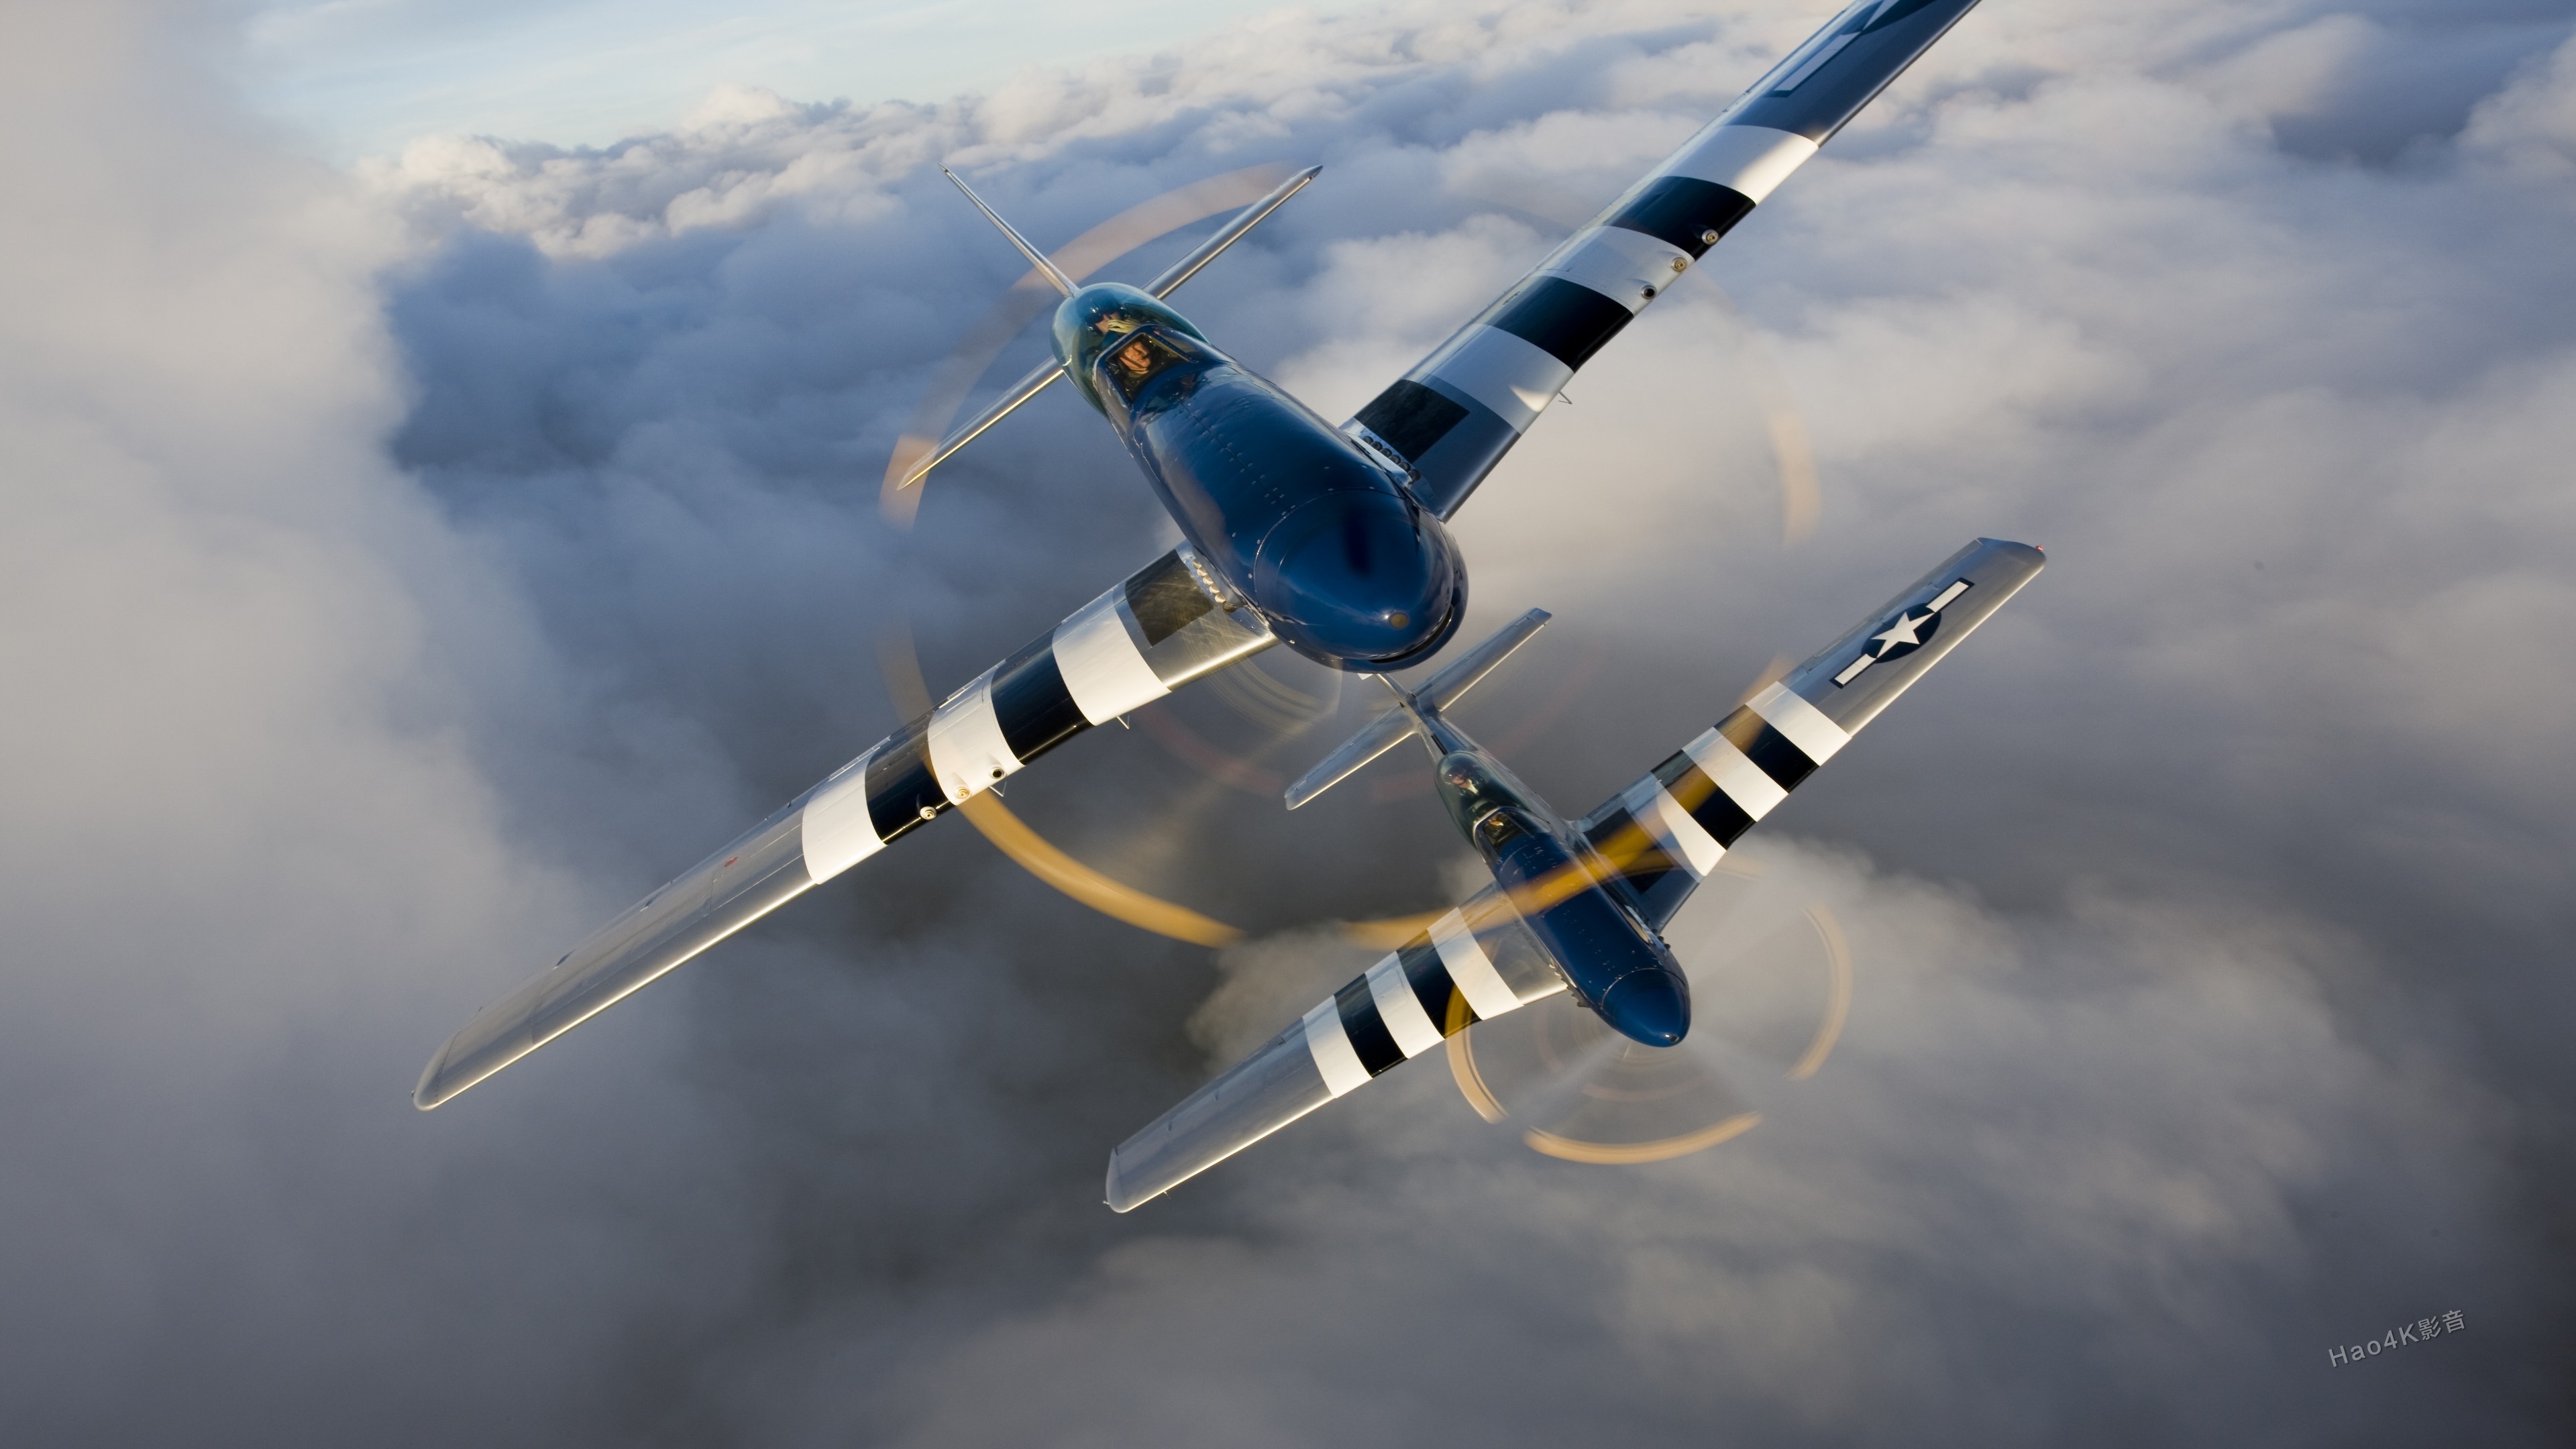 north-american-p-51-mustang-3840x2160-fighter-us-army-6892.jpg